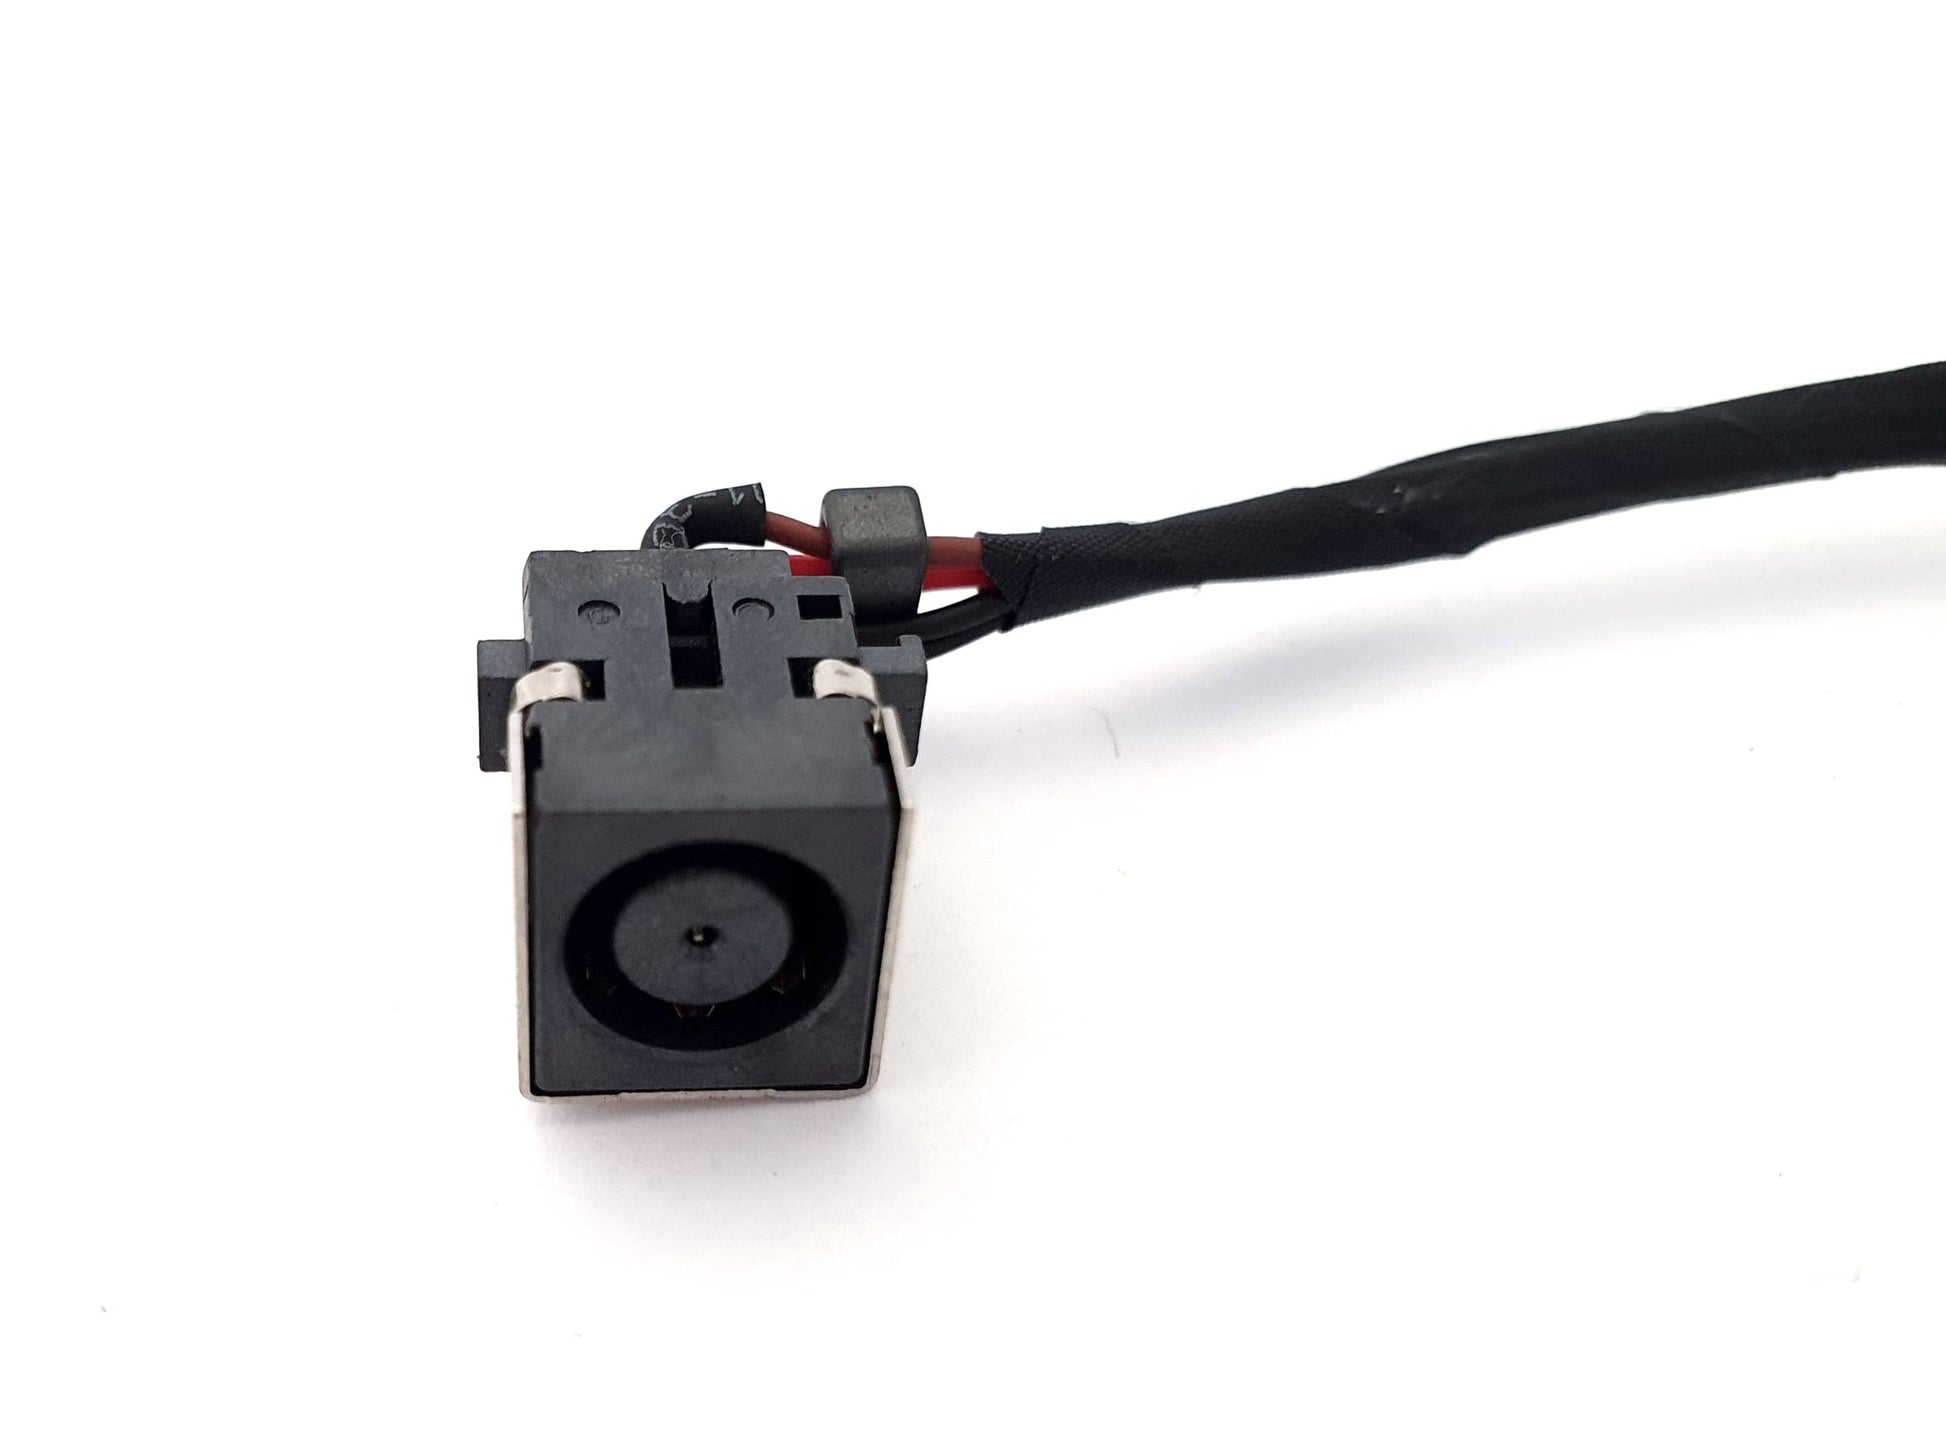 Dell replacement DC power port jack socket for Dell Latitude E7440 and E7450. 